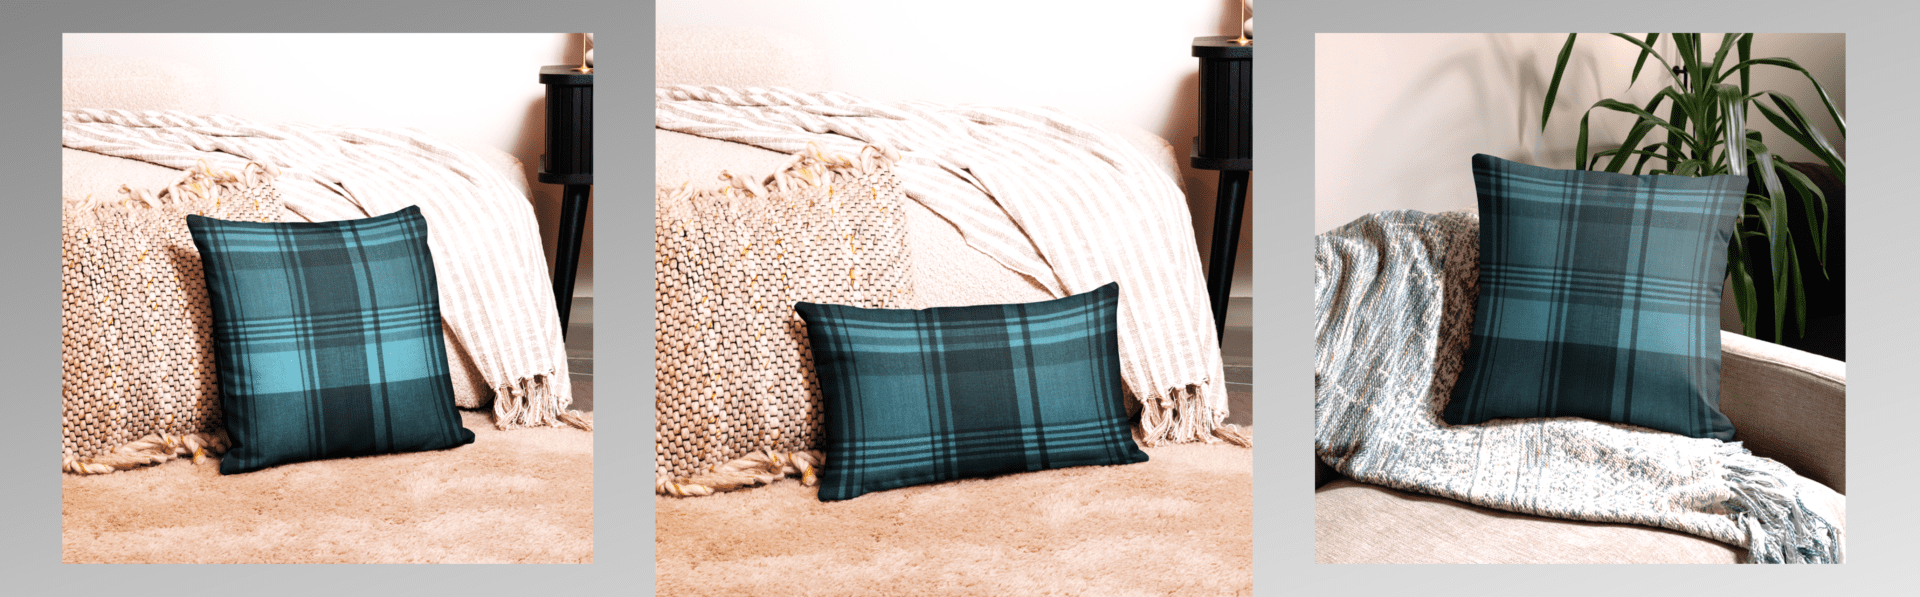 Blue and black plaid pillow on couch.